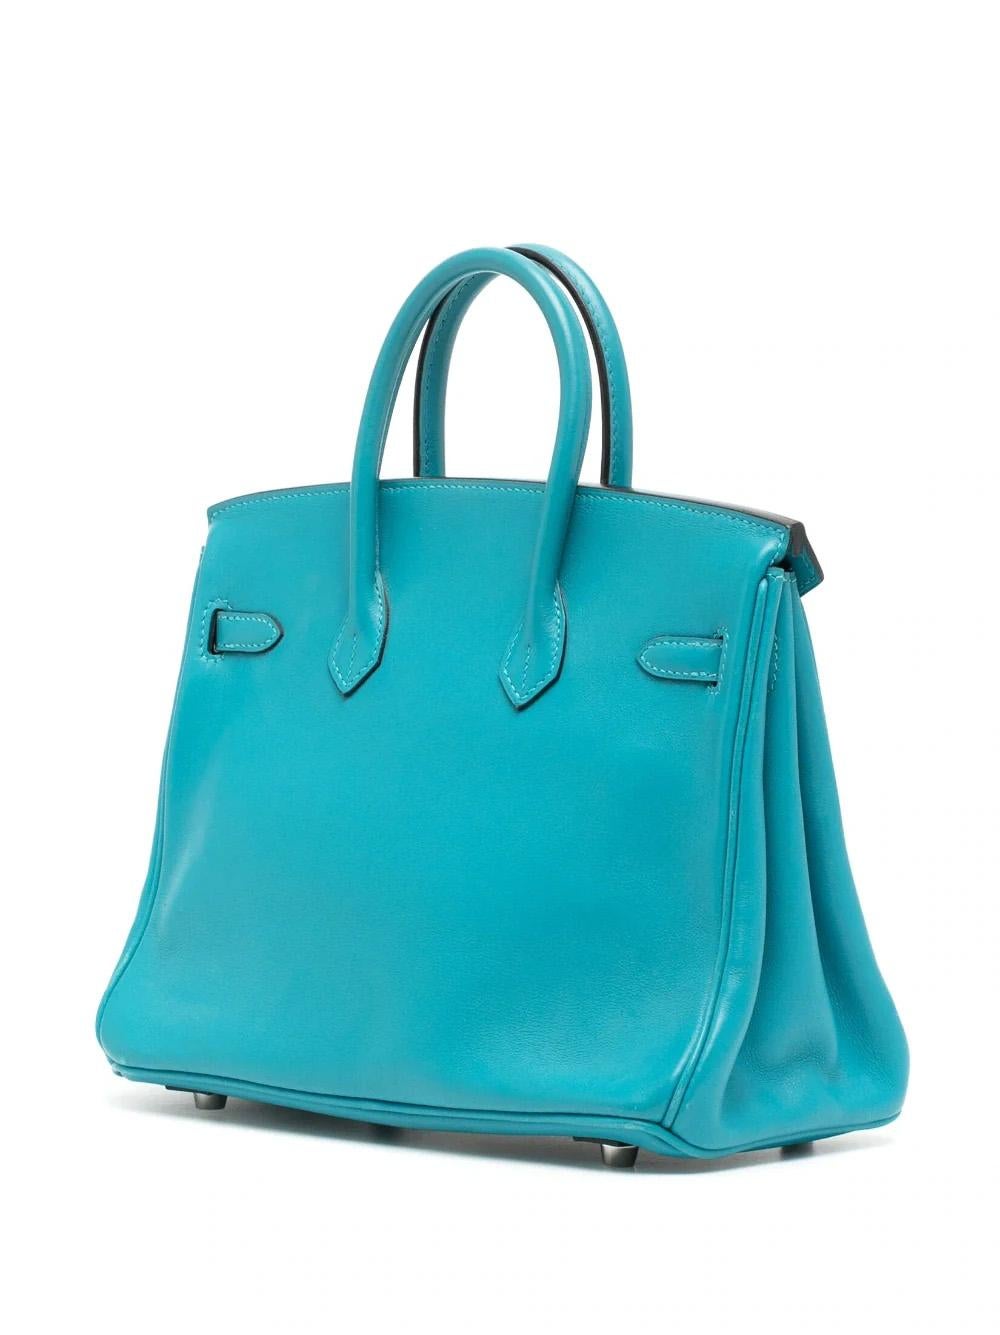 This Hermès Birkin 25 in turquoise adds a joyful pop of colour to any outfit. Handcrafted from smooth Swift leather, it's big enough to carry your essentials and works from day to night. It has been manufactured in 2007 (